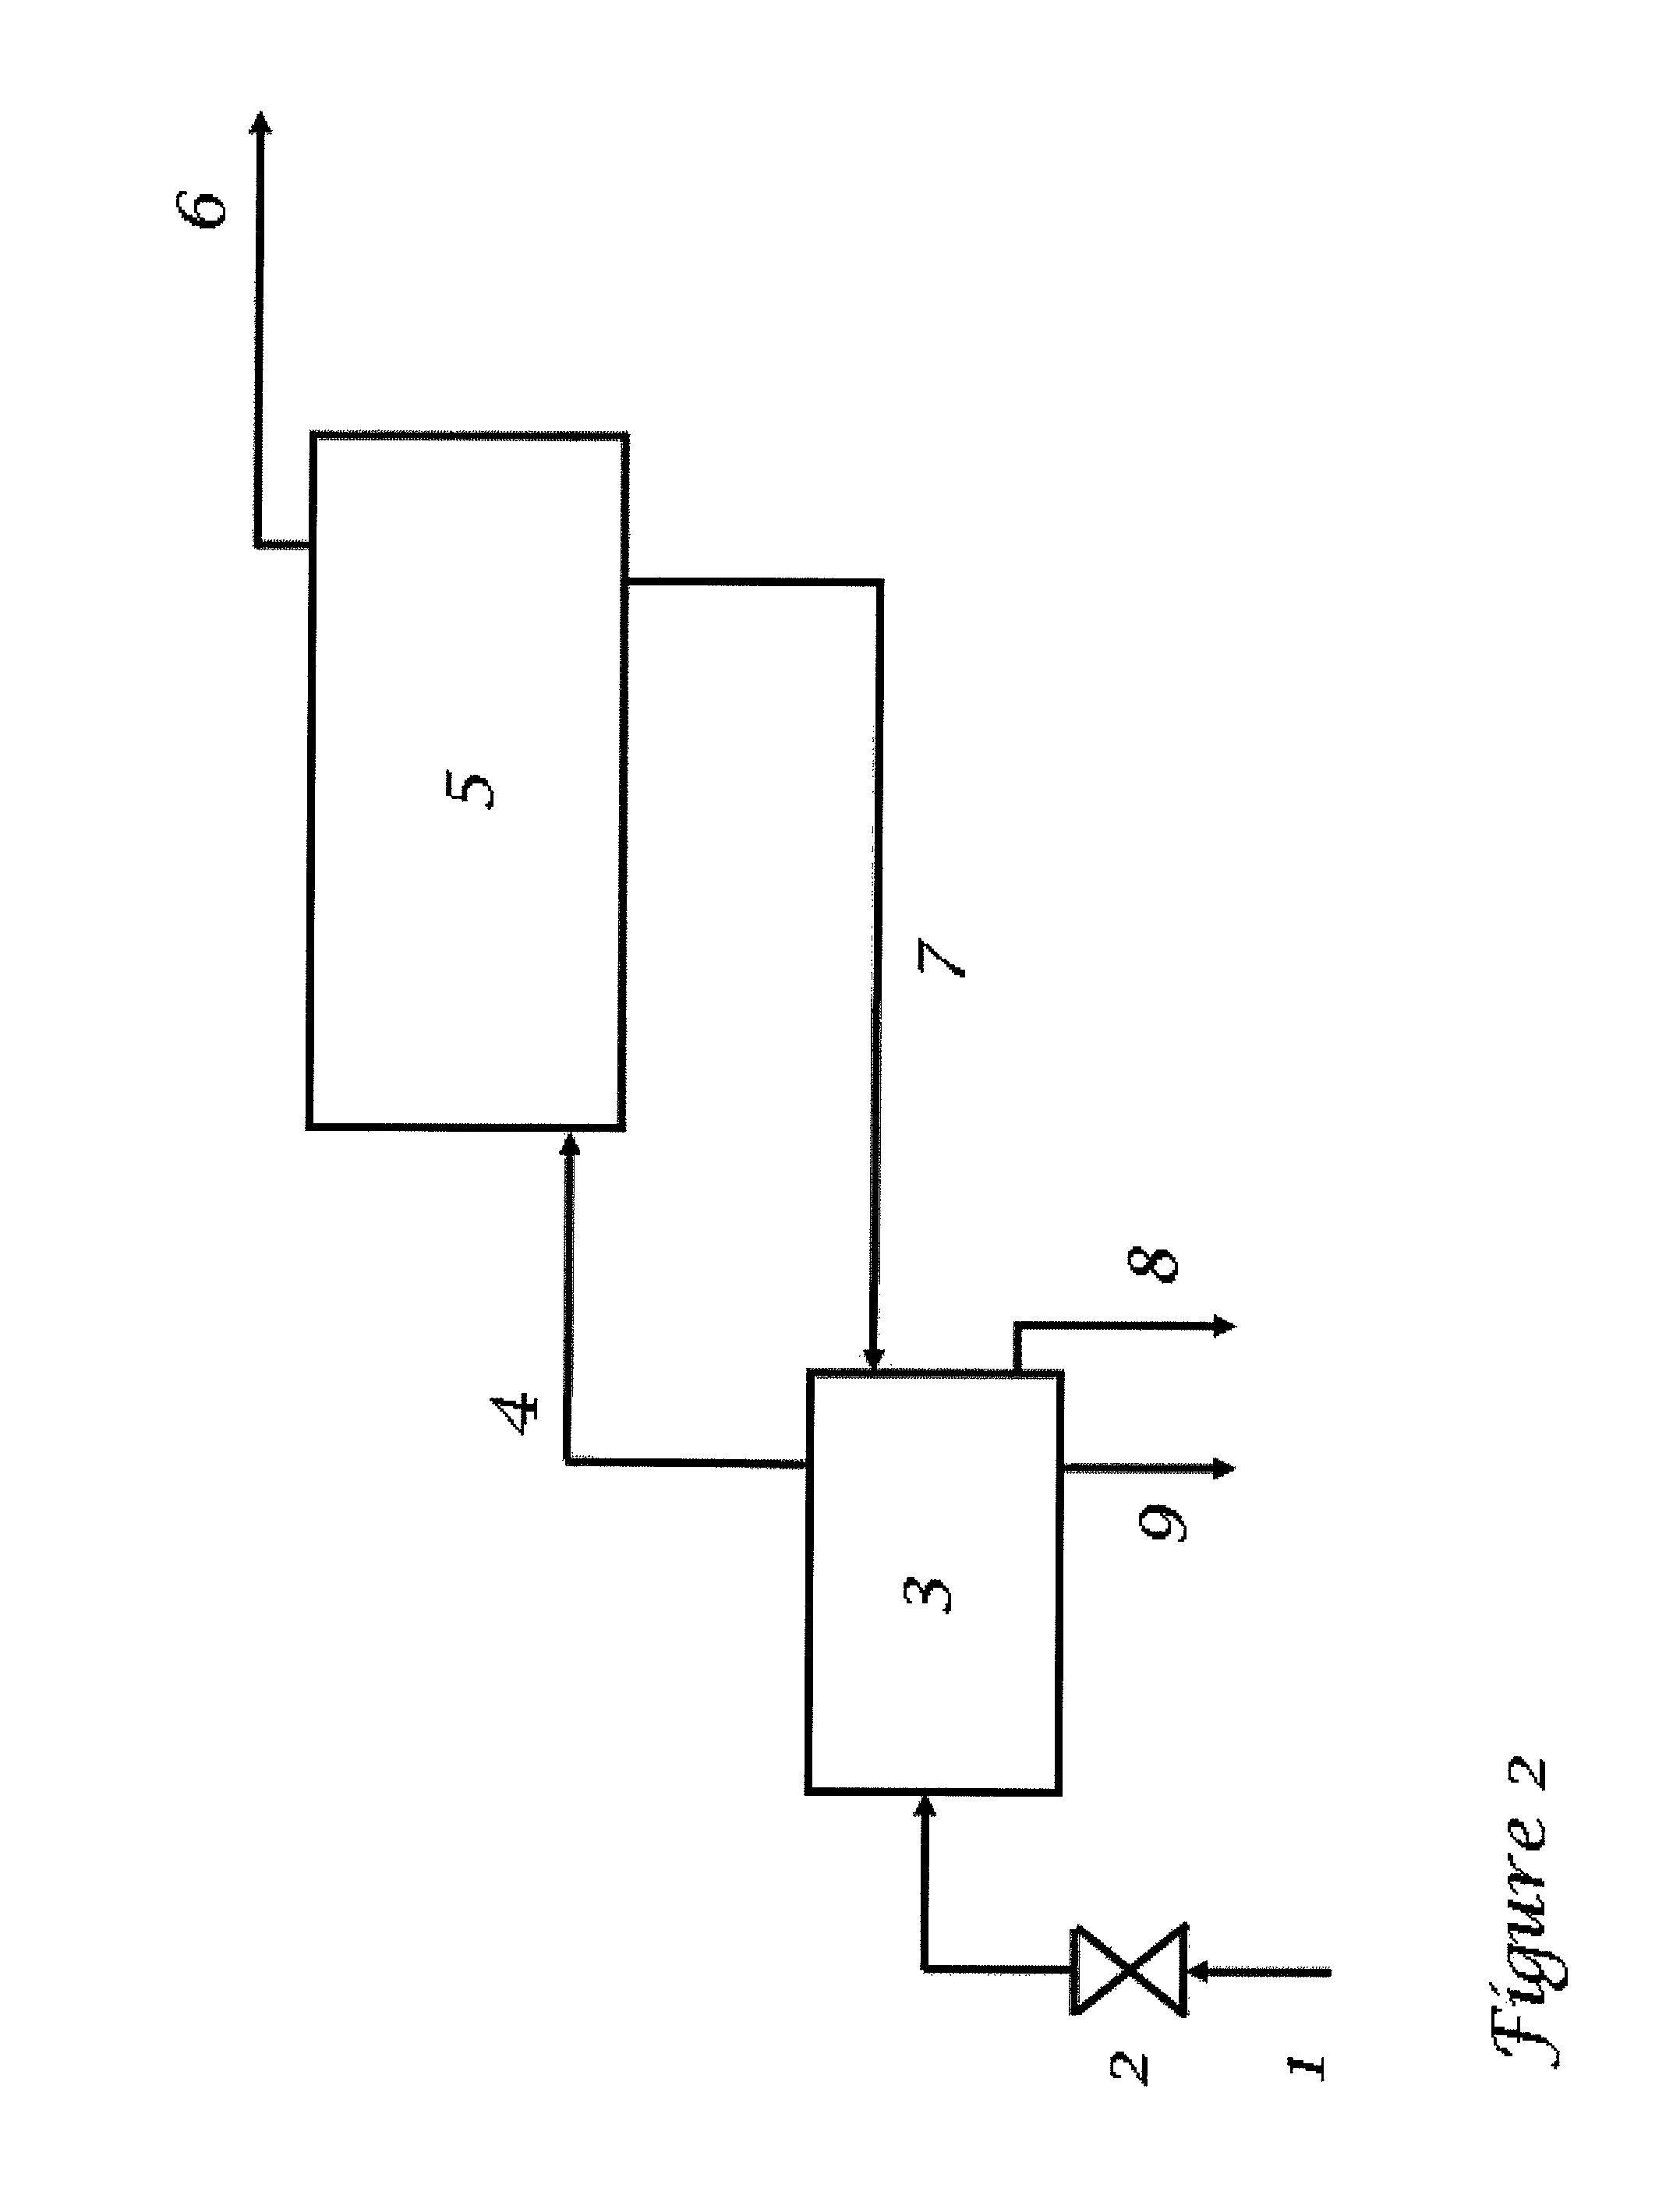 Treatment of produced hydrocarbon fluid containing water